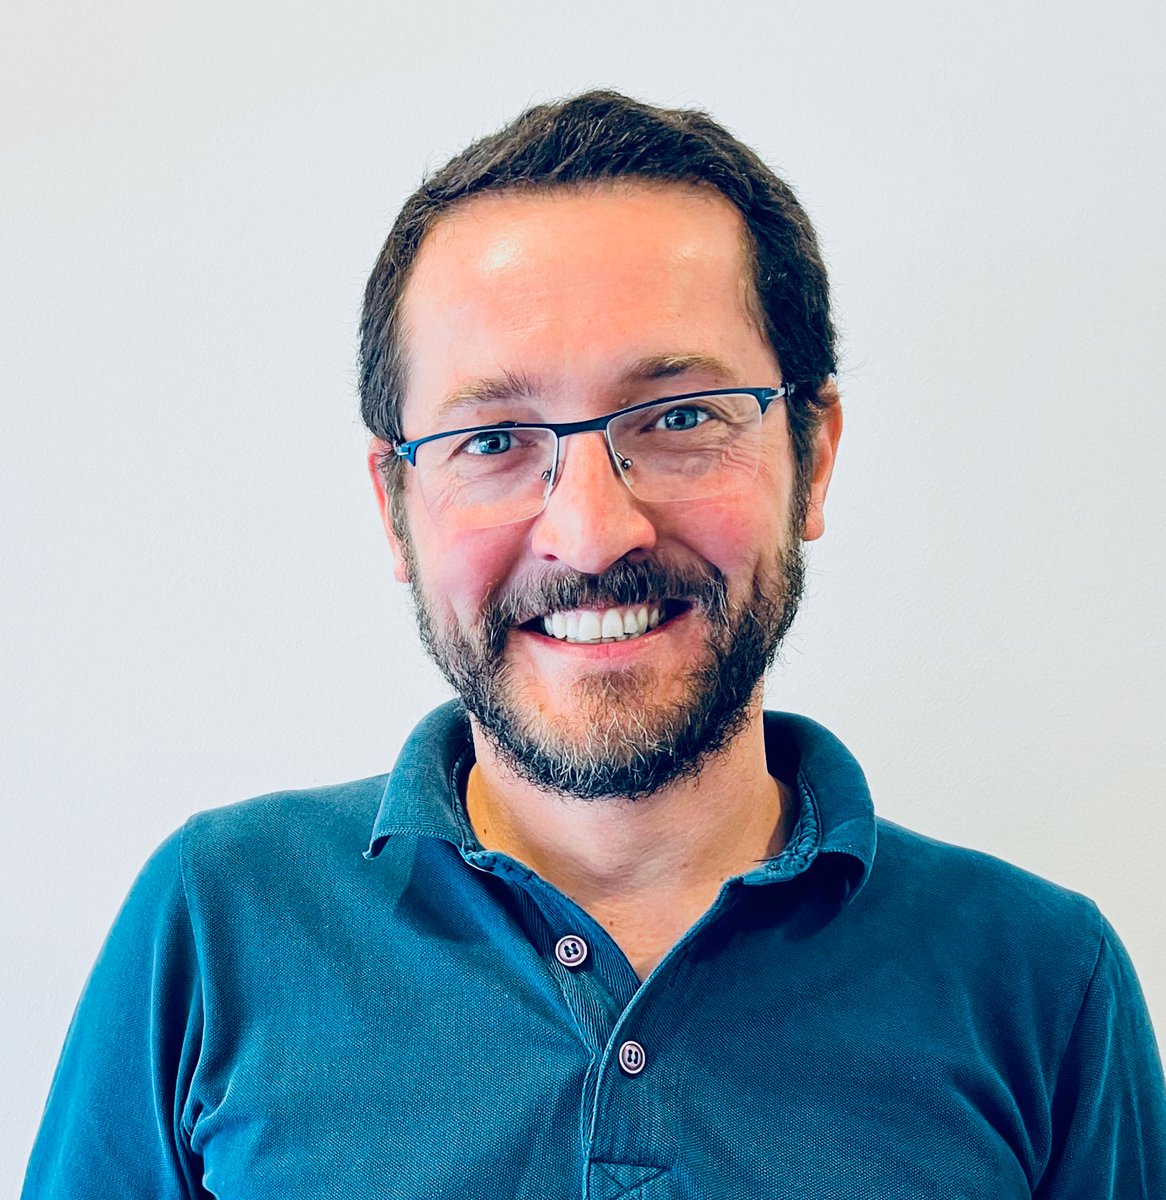 Meet our Team Wednesday: This is our Professor Xavier. He is the head of the Biomimetics group where we are busy working on a spectrum of projects from microfluidics, organ on chips, synthetic cells and mass diagnostic tests @KU_Leuven @biosystkuleuven #meettheteam #biomimetics